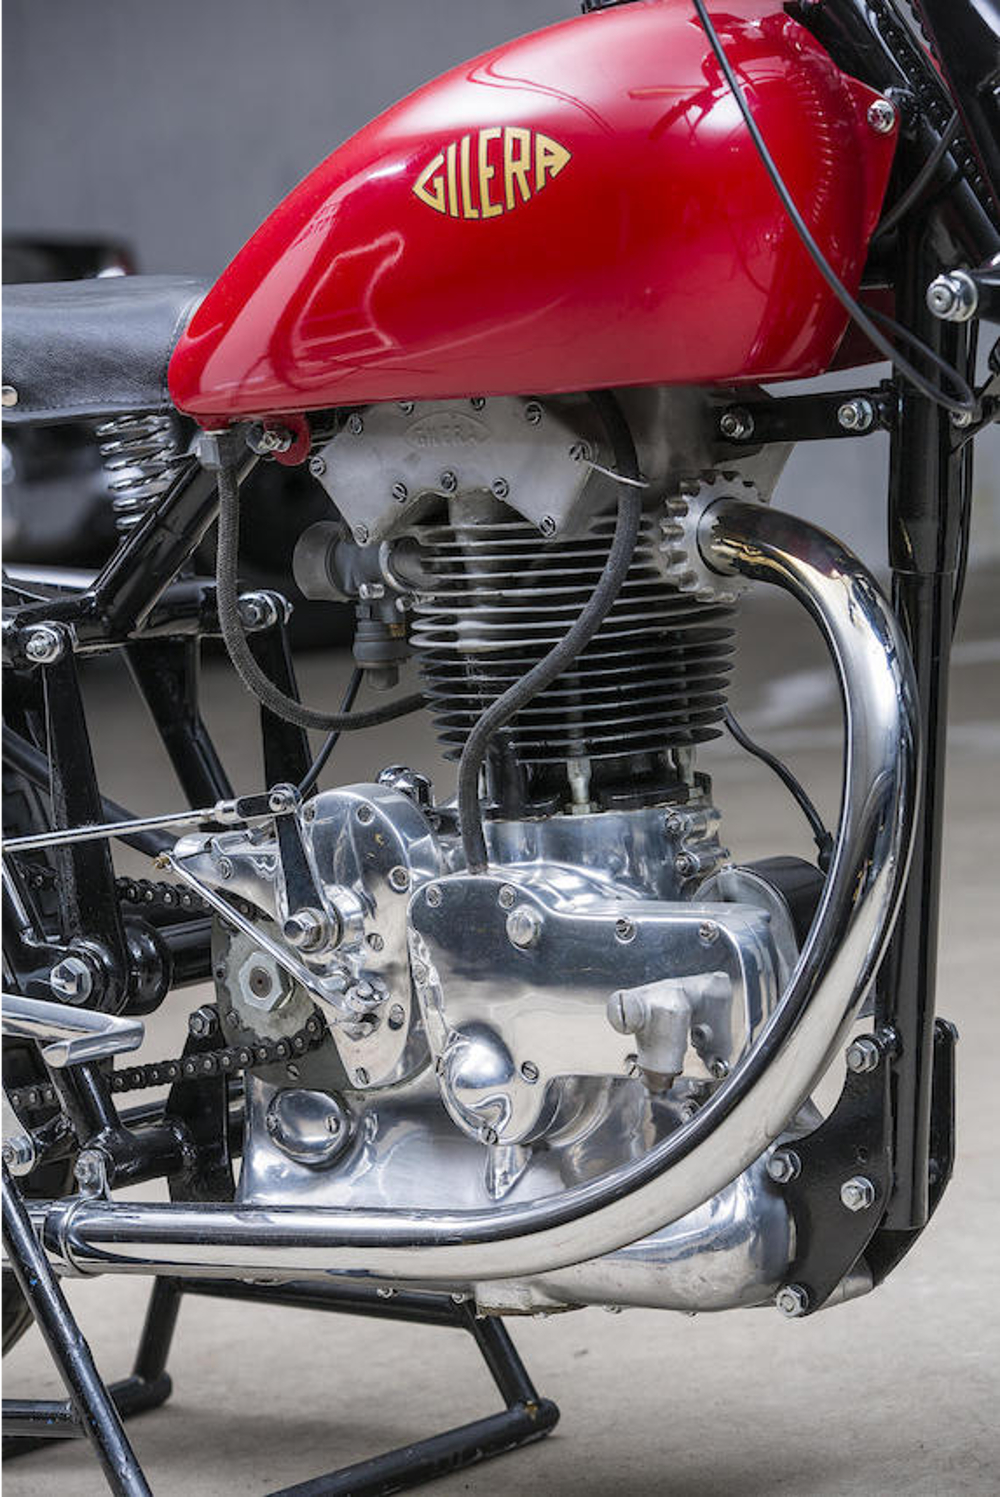 The engine forms part of the frame of the Gilera Saturno.